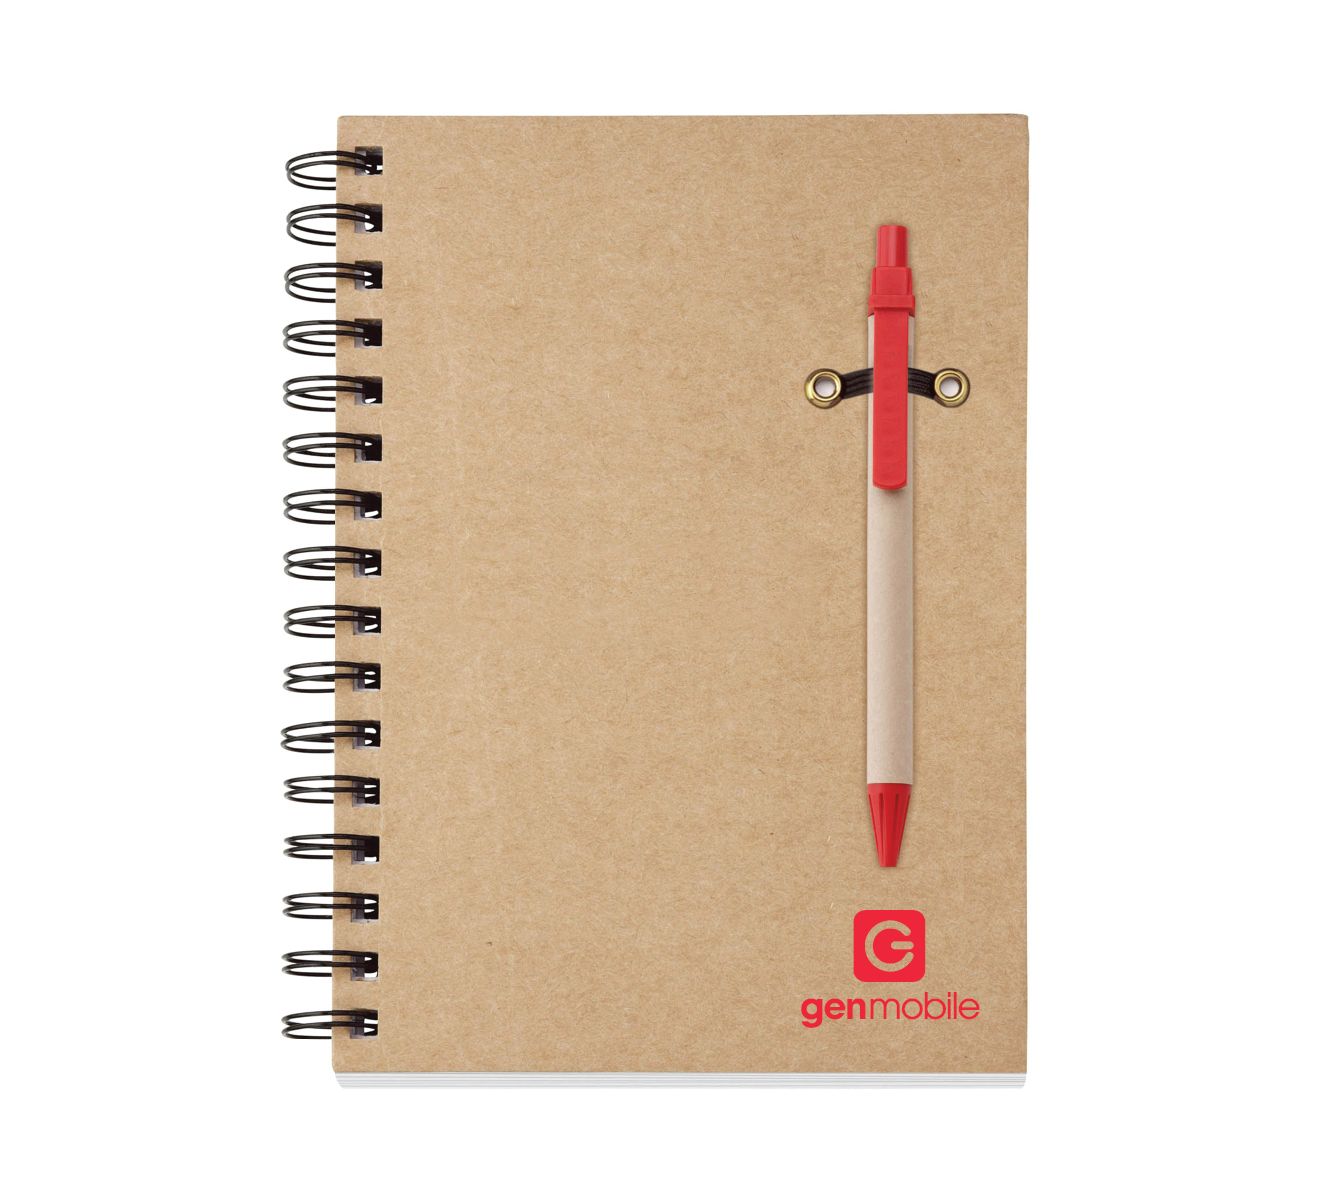 Eco Spiral Notebook Combo with Gen Mobile Logo